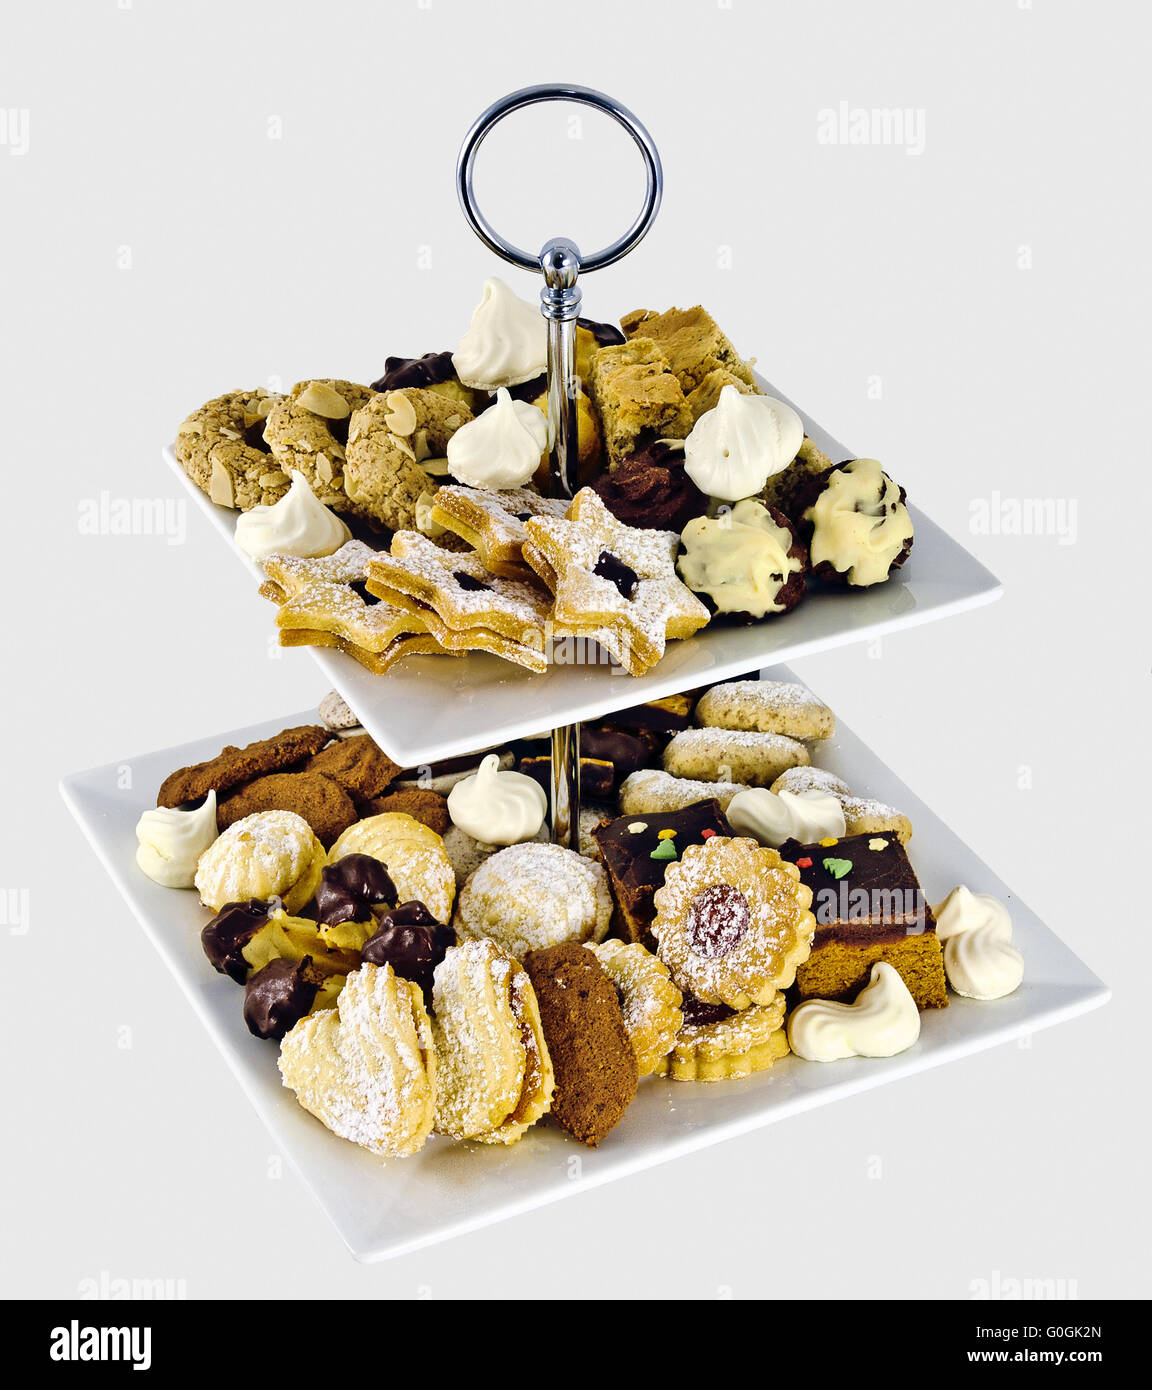 Different cookies on an étagère Stock Photo